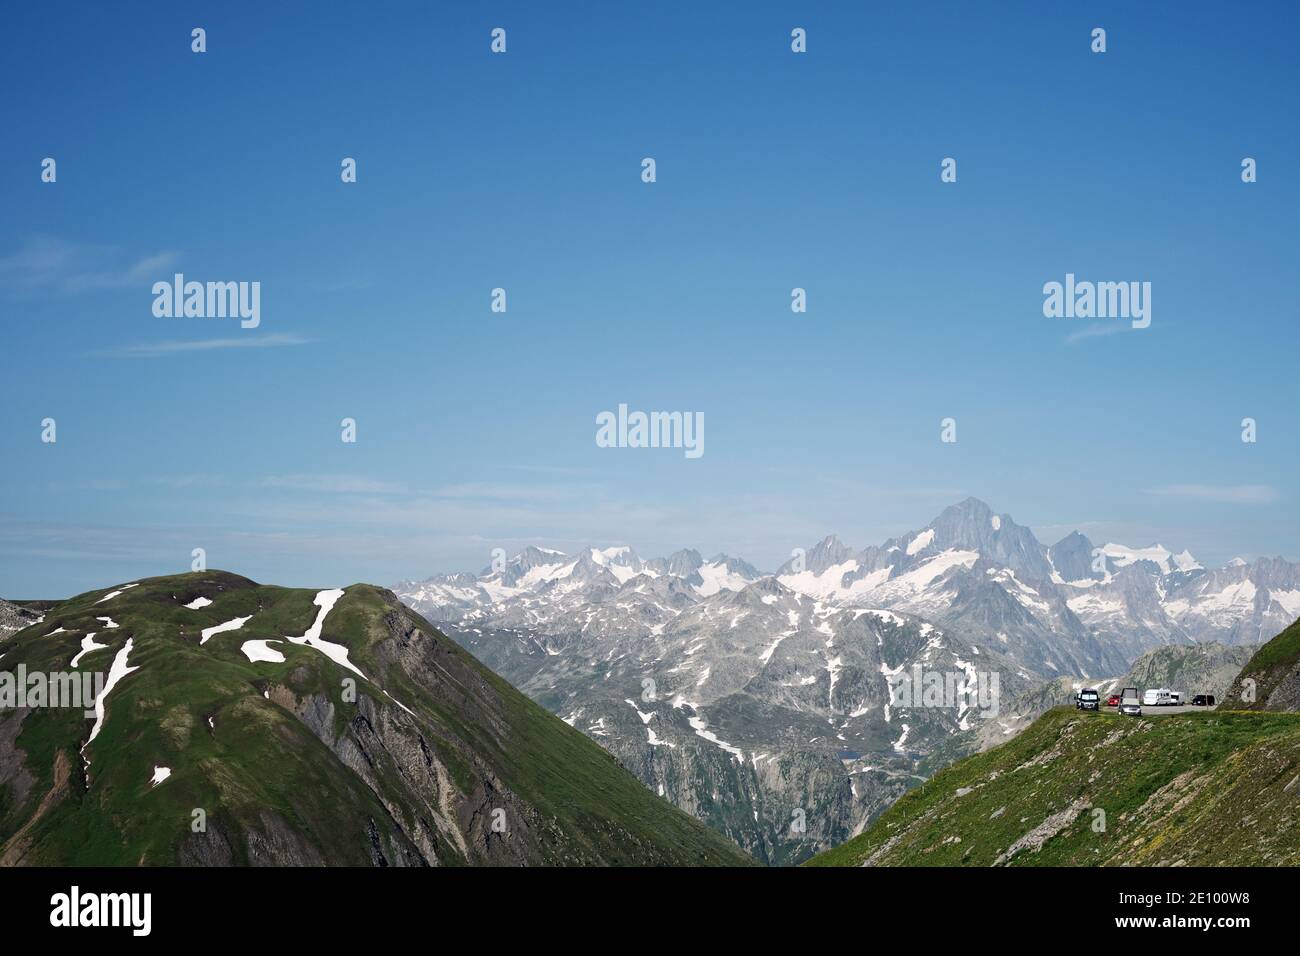 The Furka Pass mountain landscape and distant camper vans parked in the Swiss Alps mountain top landscape of Realp, Uri, Switzerland EU Stock Photo